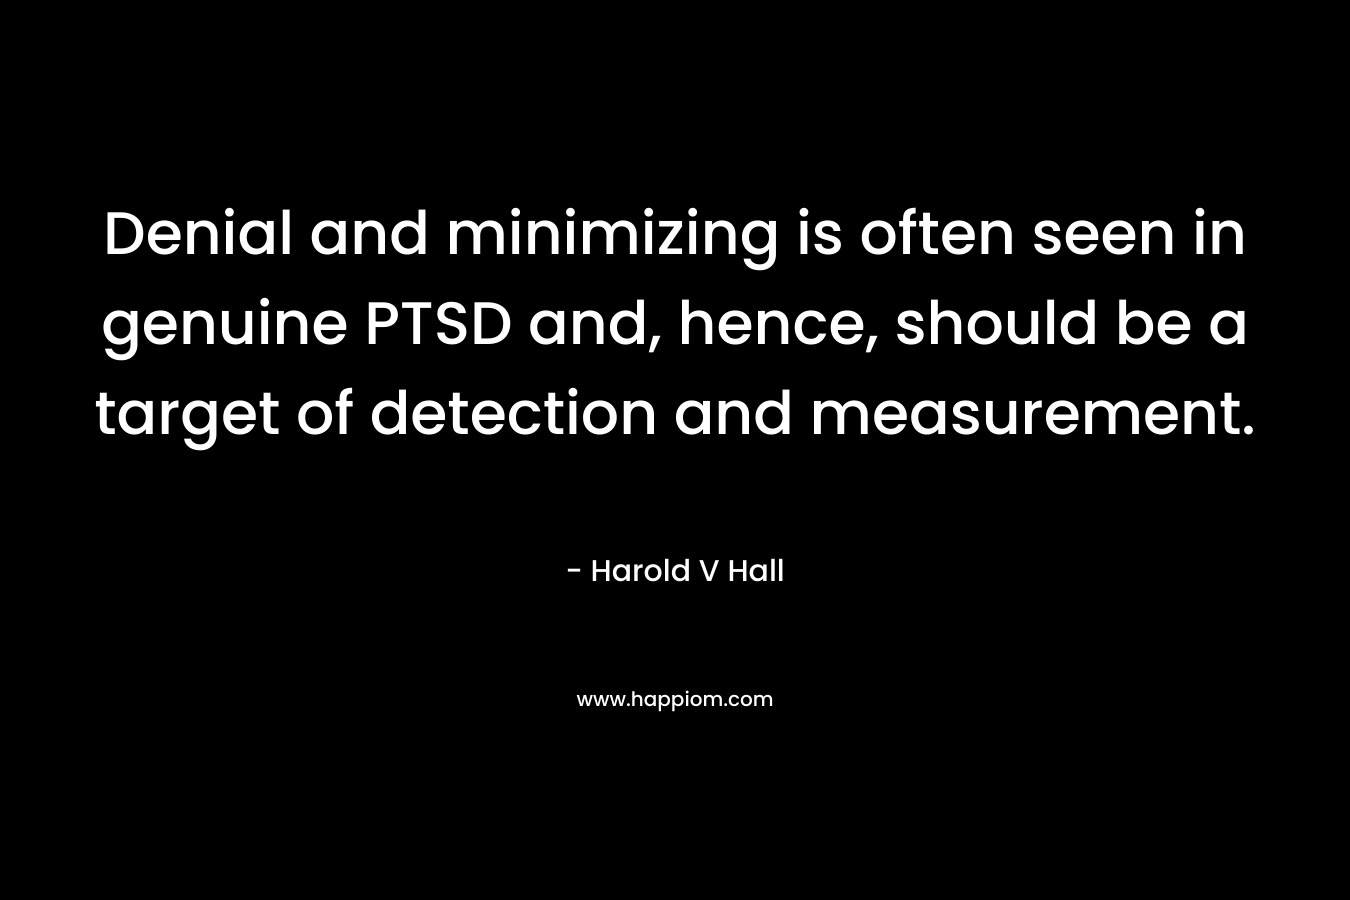 Denial and minimizing is often seen in genuine PTSD and, hence, should be a target of detection and measurement.